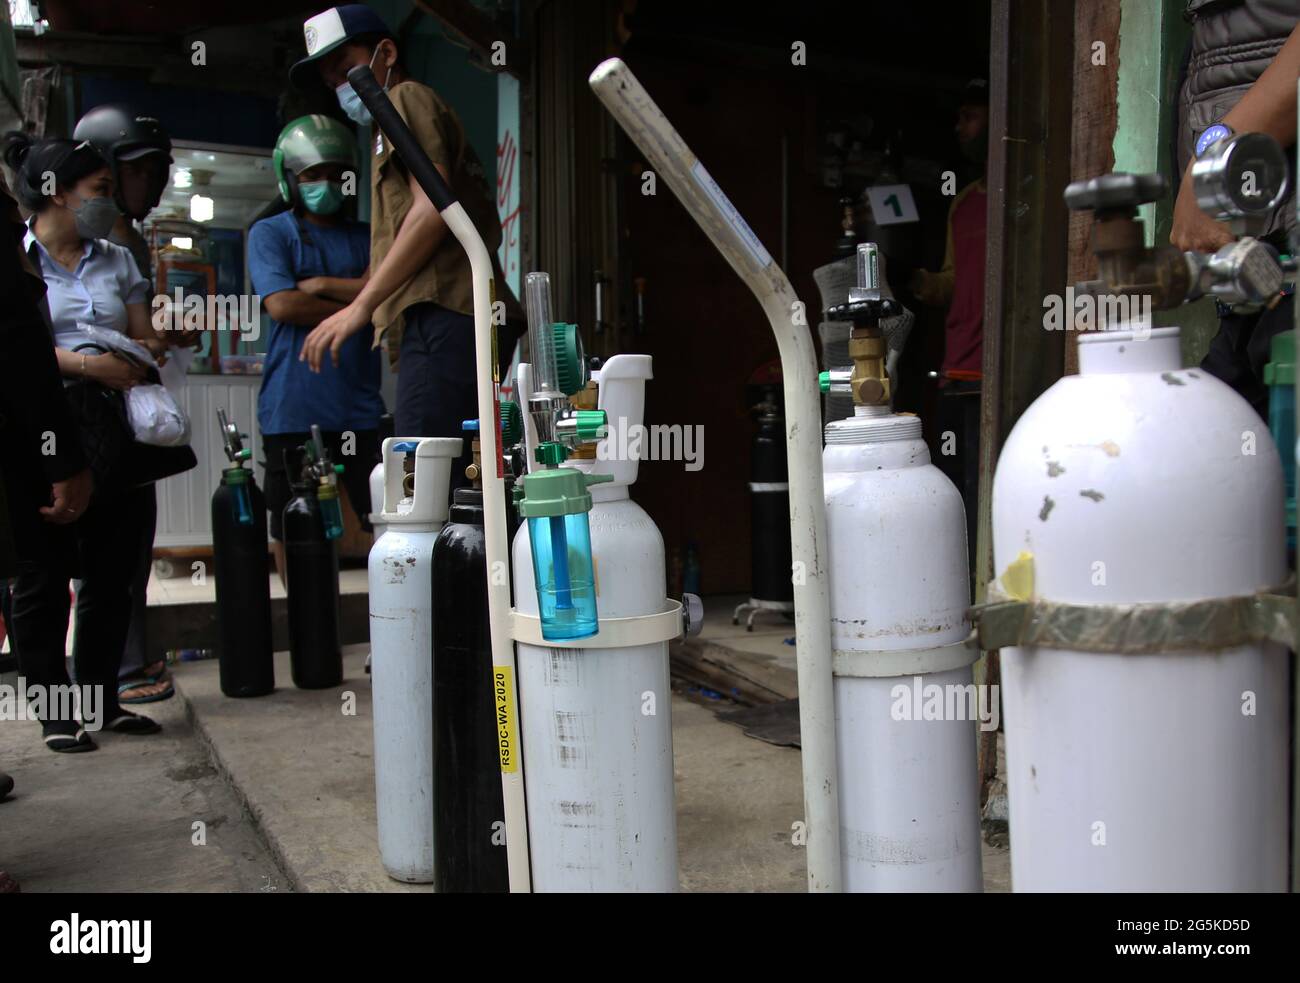 Jakarta, Jakarta, Indonesia. 28th June, 2021. Residents queue for filling oxygen gas cylinders in Manggarai, Jakarta, on June 28, 2021. The demand for new oxygen cylinders and filling oxygen cylinders has increased drastically following the surge in Covid-19 cases in DKI Jakarta and currently oxygen cylinders are becoming scarce in the market so that refilling oxygen is also an option even though residents have to queue. Credit: Dasril Roszandi/ZUMA Wire/Alamy Live News Stock Photo